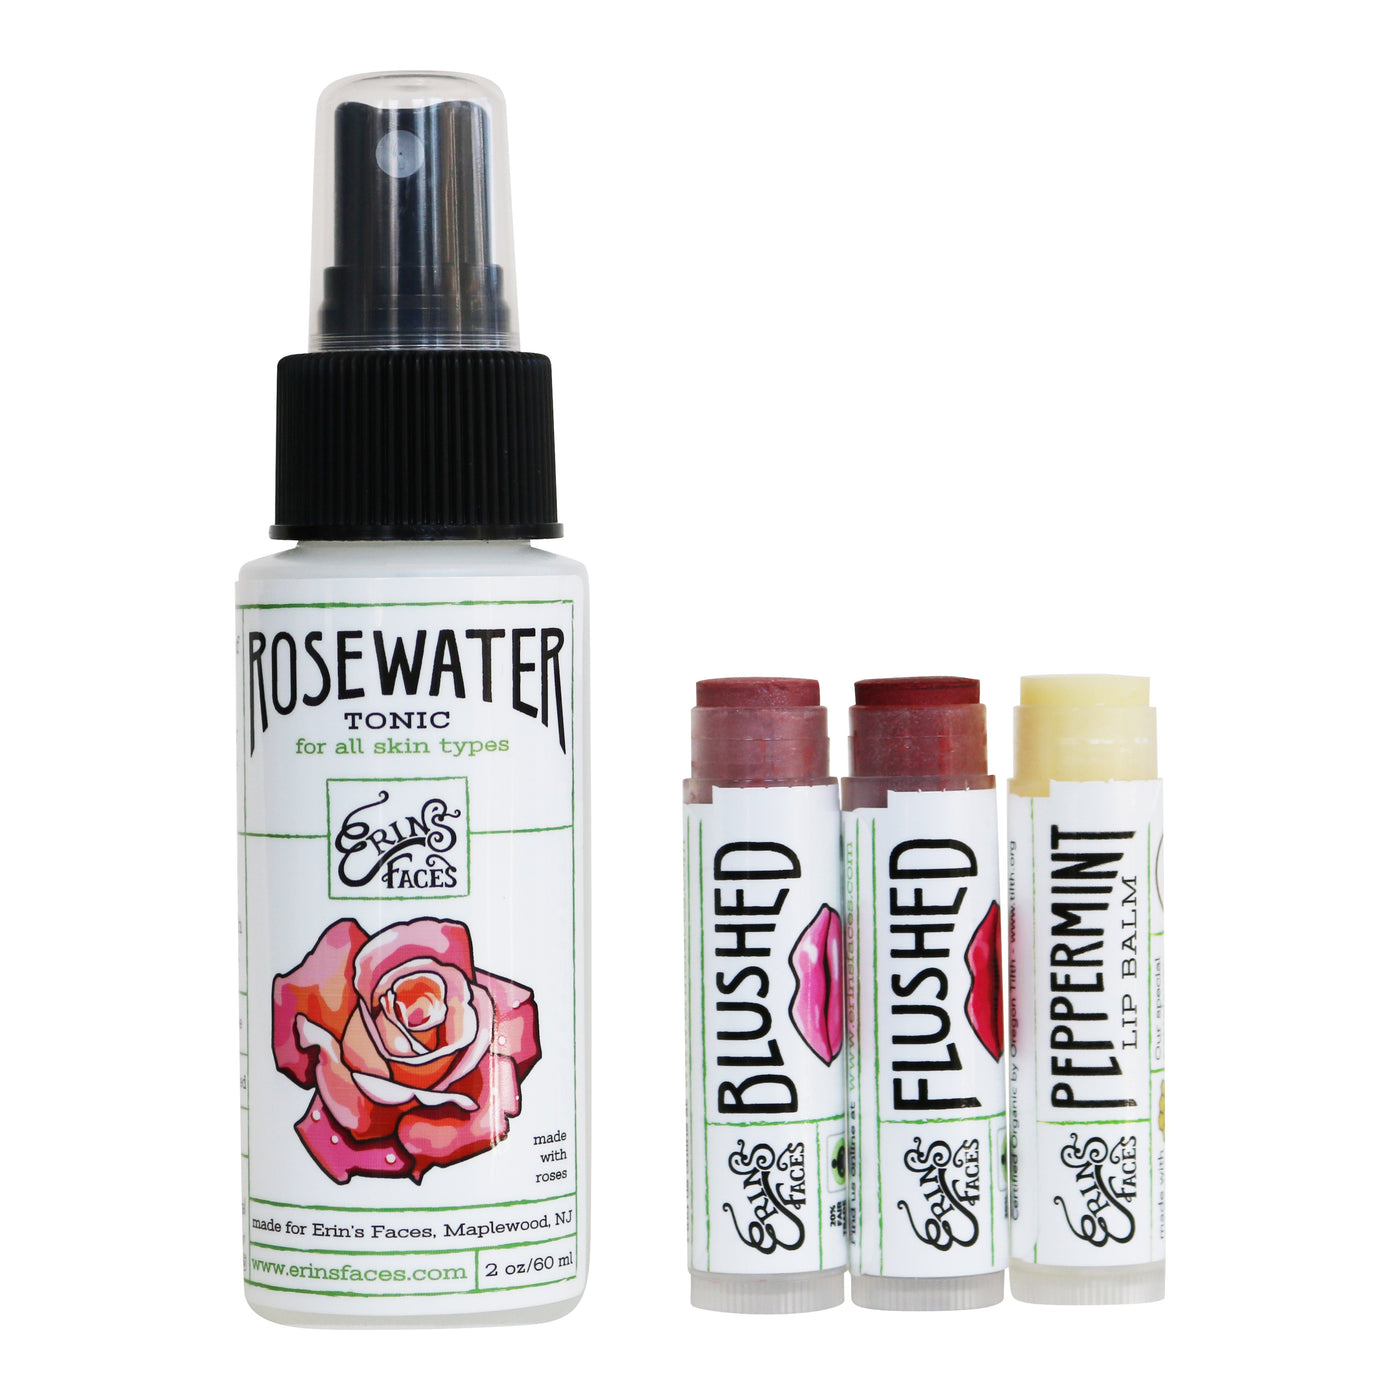 set of the rosewater toner, tinted lip balm color blushed and flushed, and organic peppermint lip balm